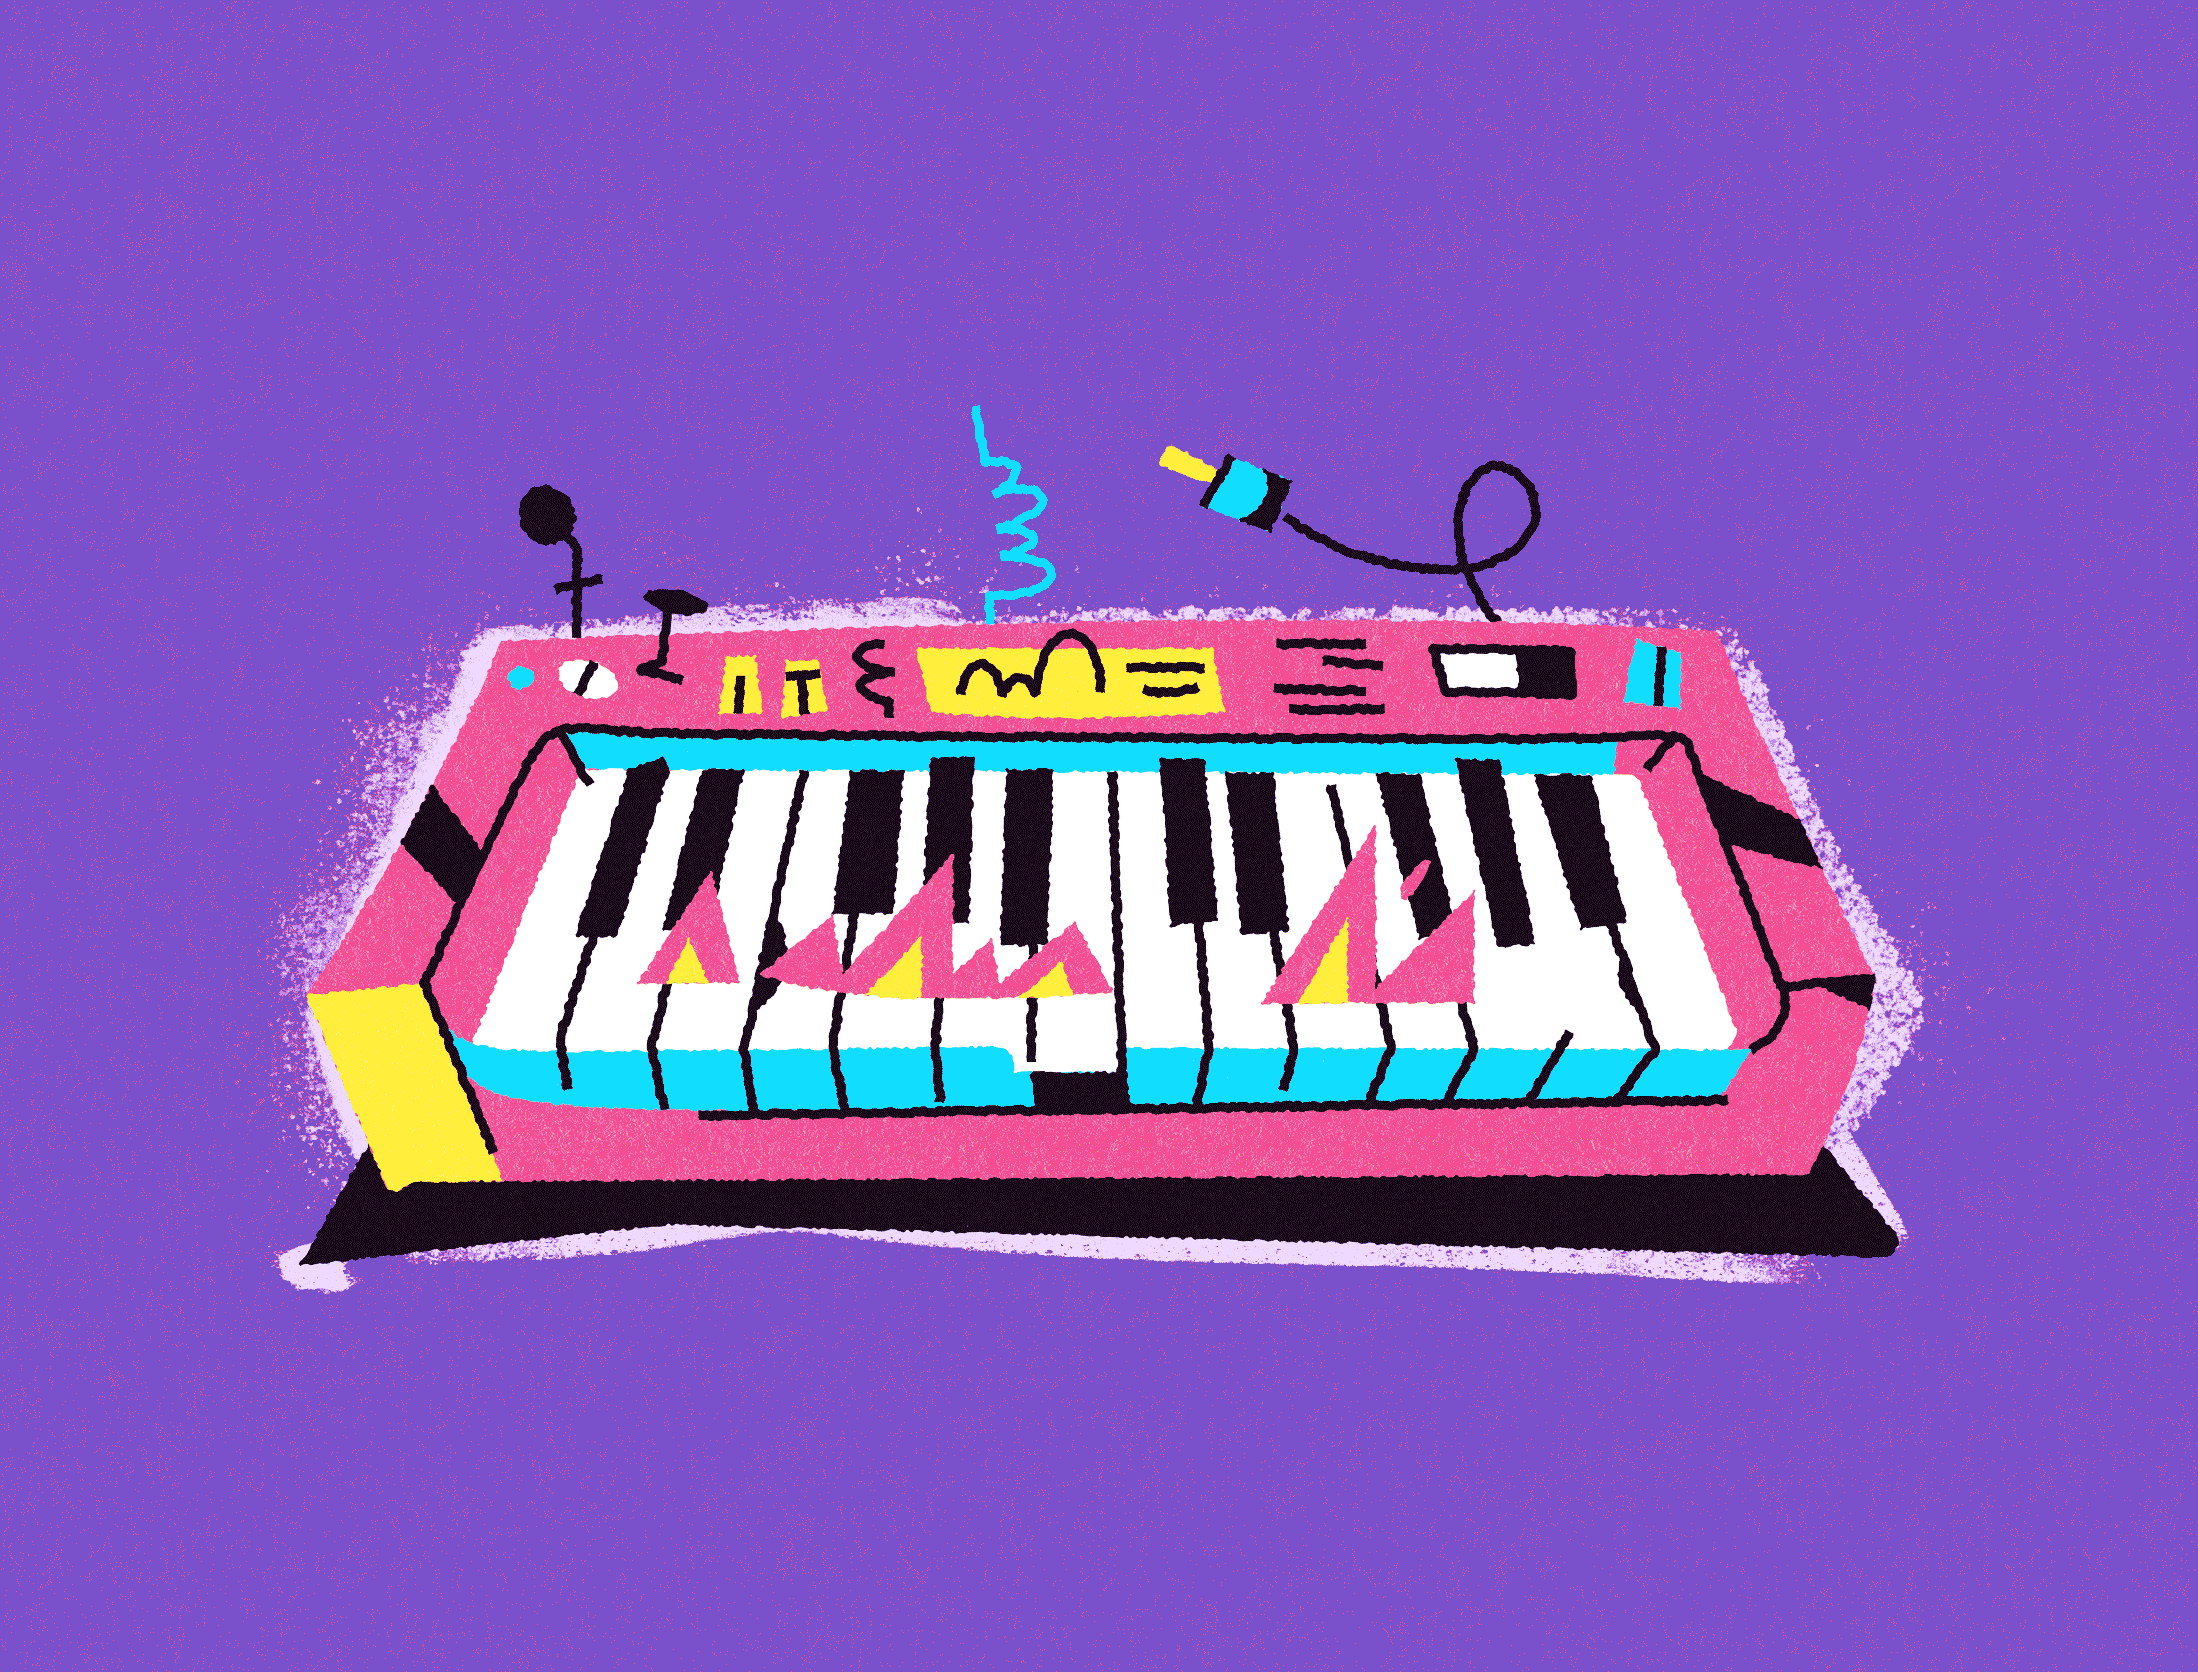 Synth on fire animation art design fire frametoframe illustration music synth